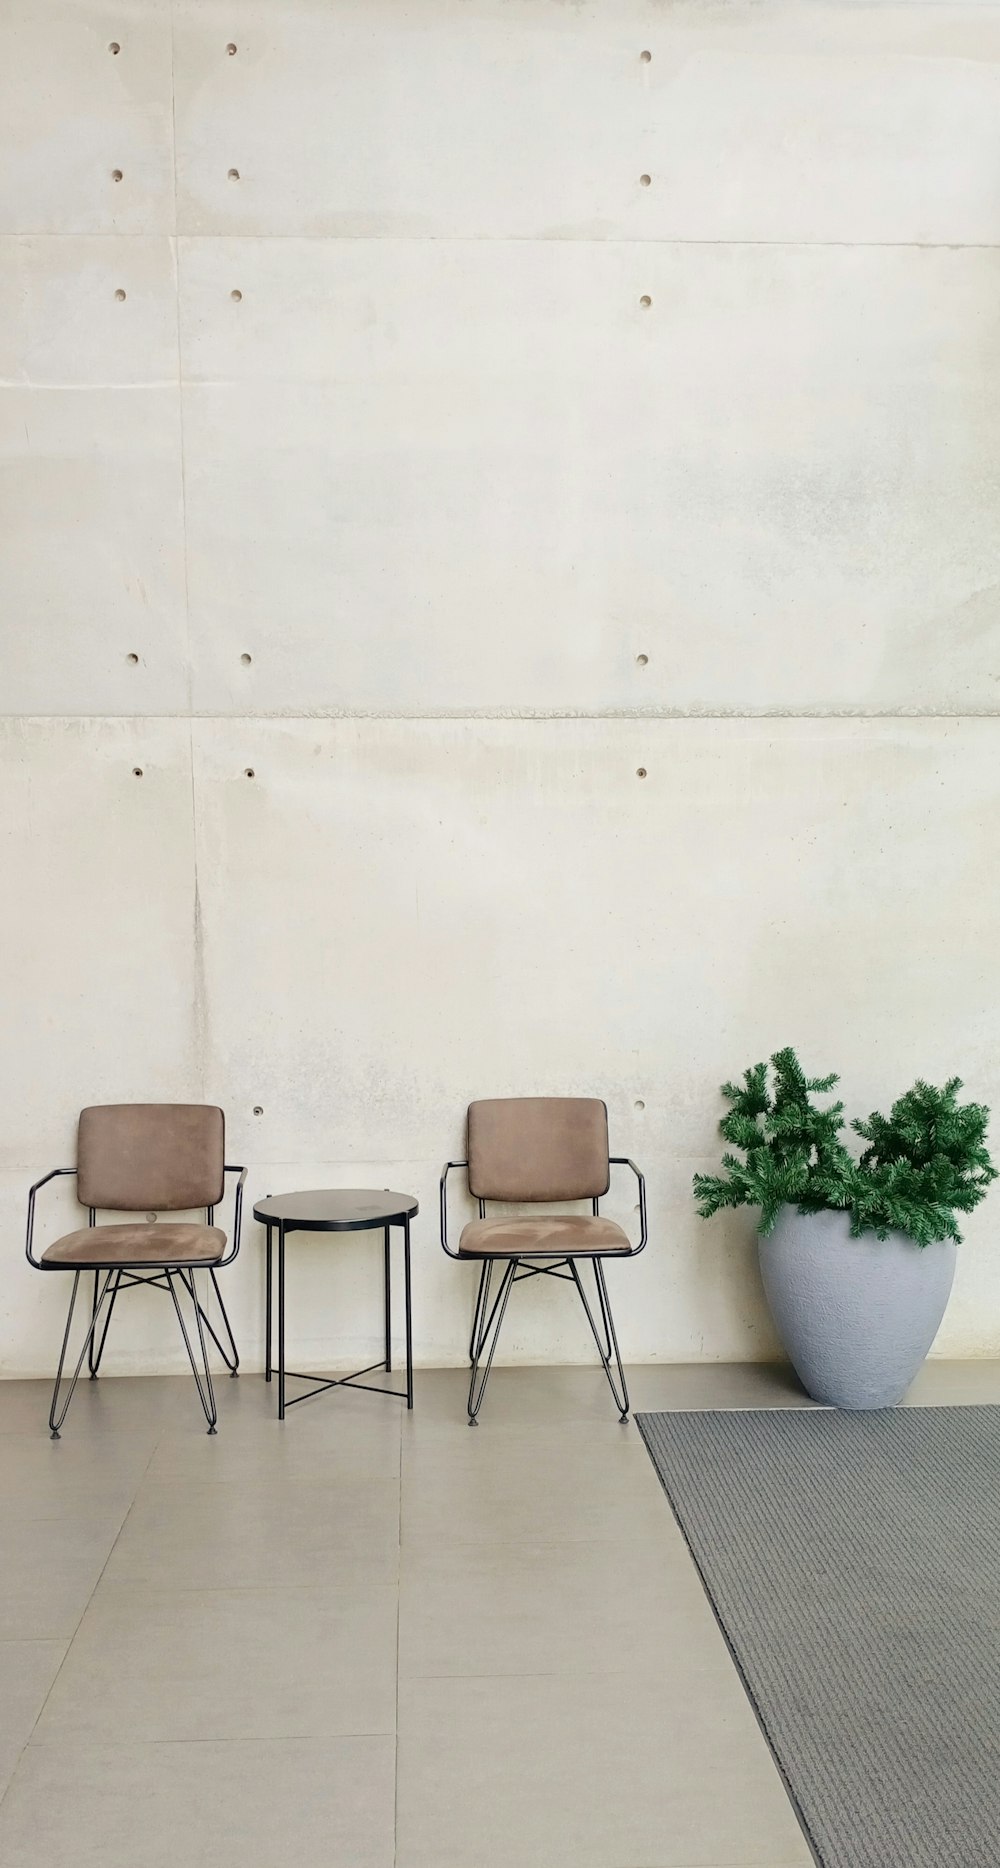 a couple of chairs sitting next to a plant